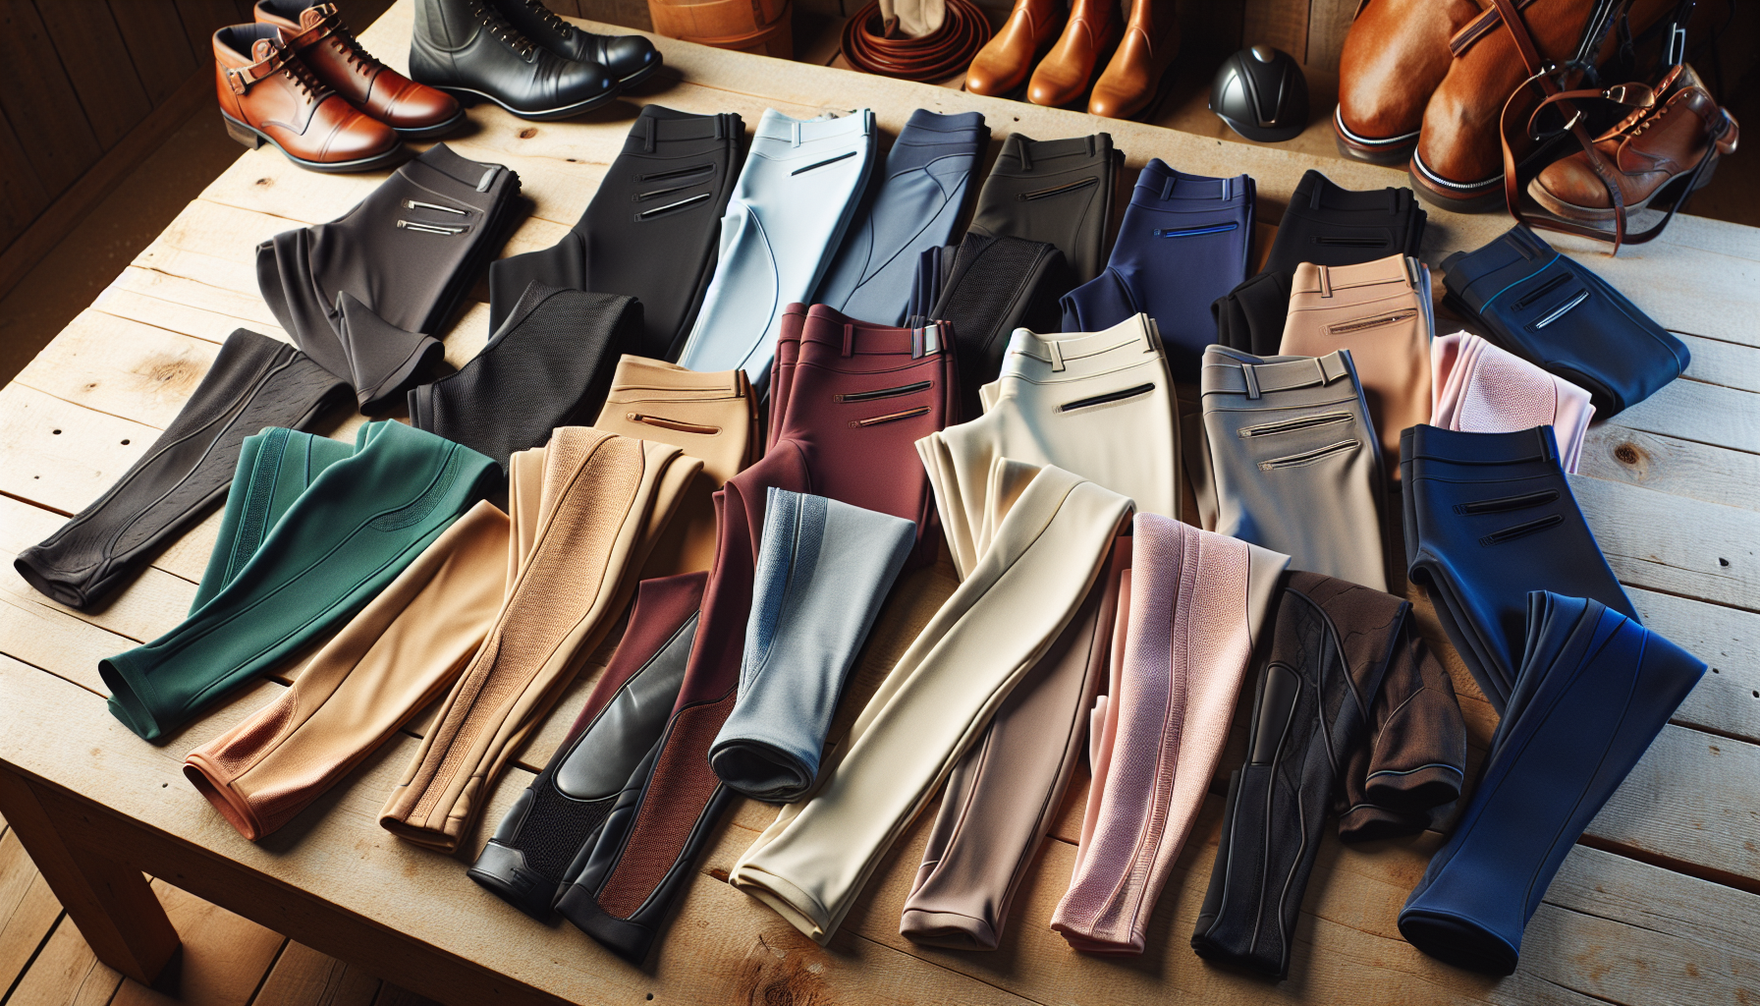 A flatlay of an array of different schooling tights for daily equestrian practice. The image shows several high-quality tights surfaced on a neutral wooden table. The range includes varying colors fro